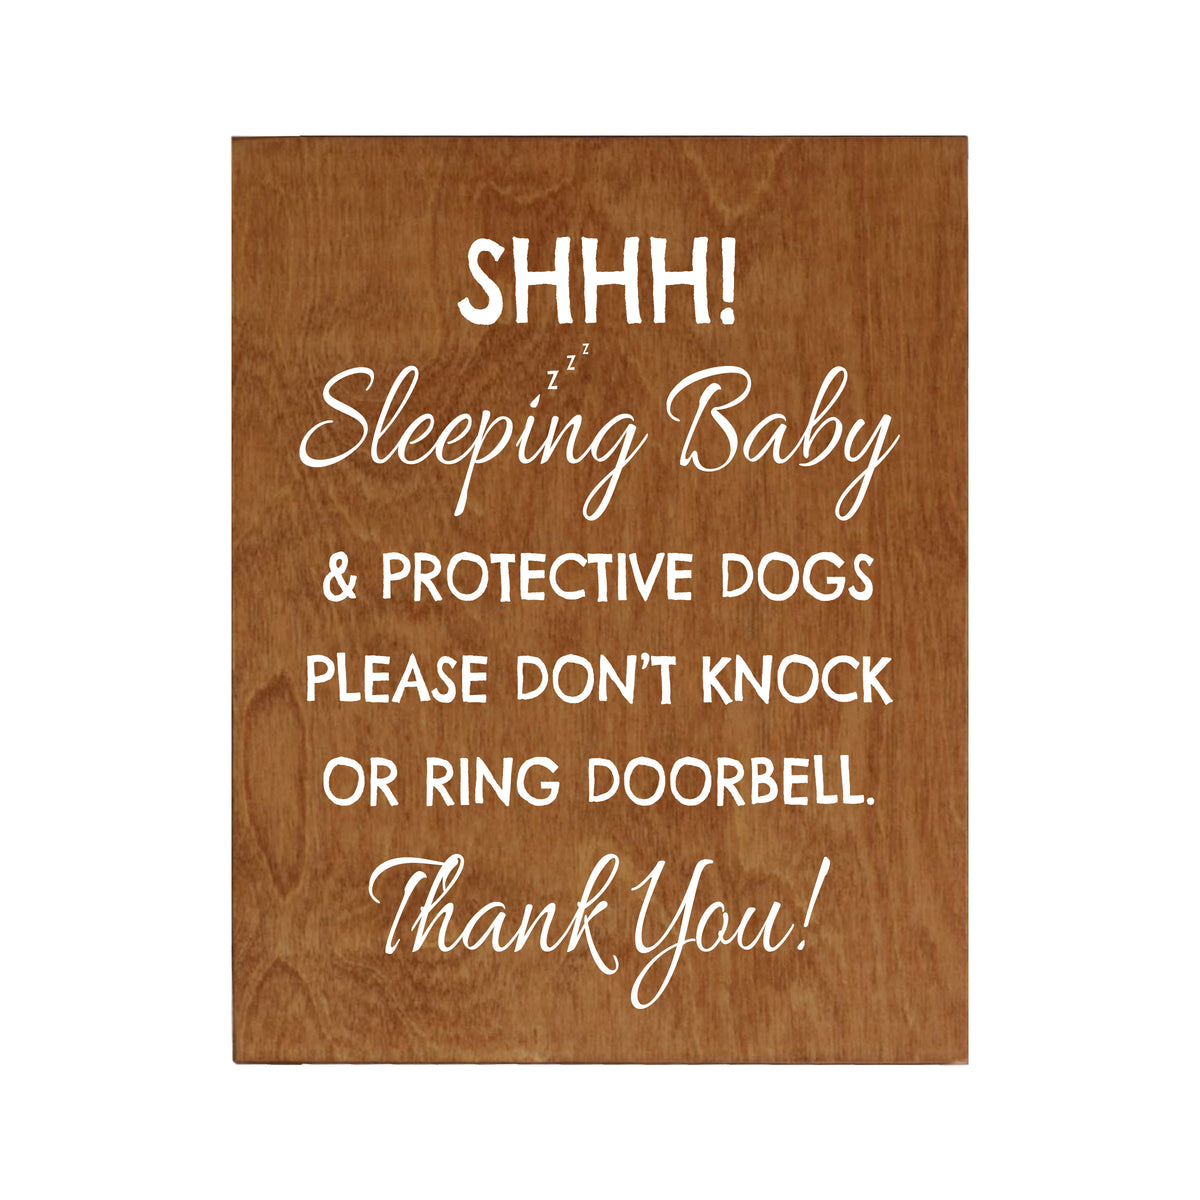 LifeSong Milestones Sleeping Baby Protective Puppies Baltic Birch Sign for Front Door - Do Not Knock or Ring Doorbell - Quiet Entry for House Home Decor - 8x10